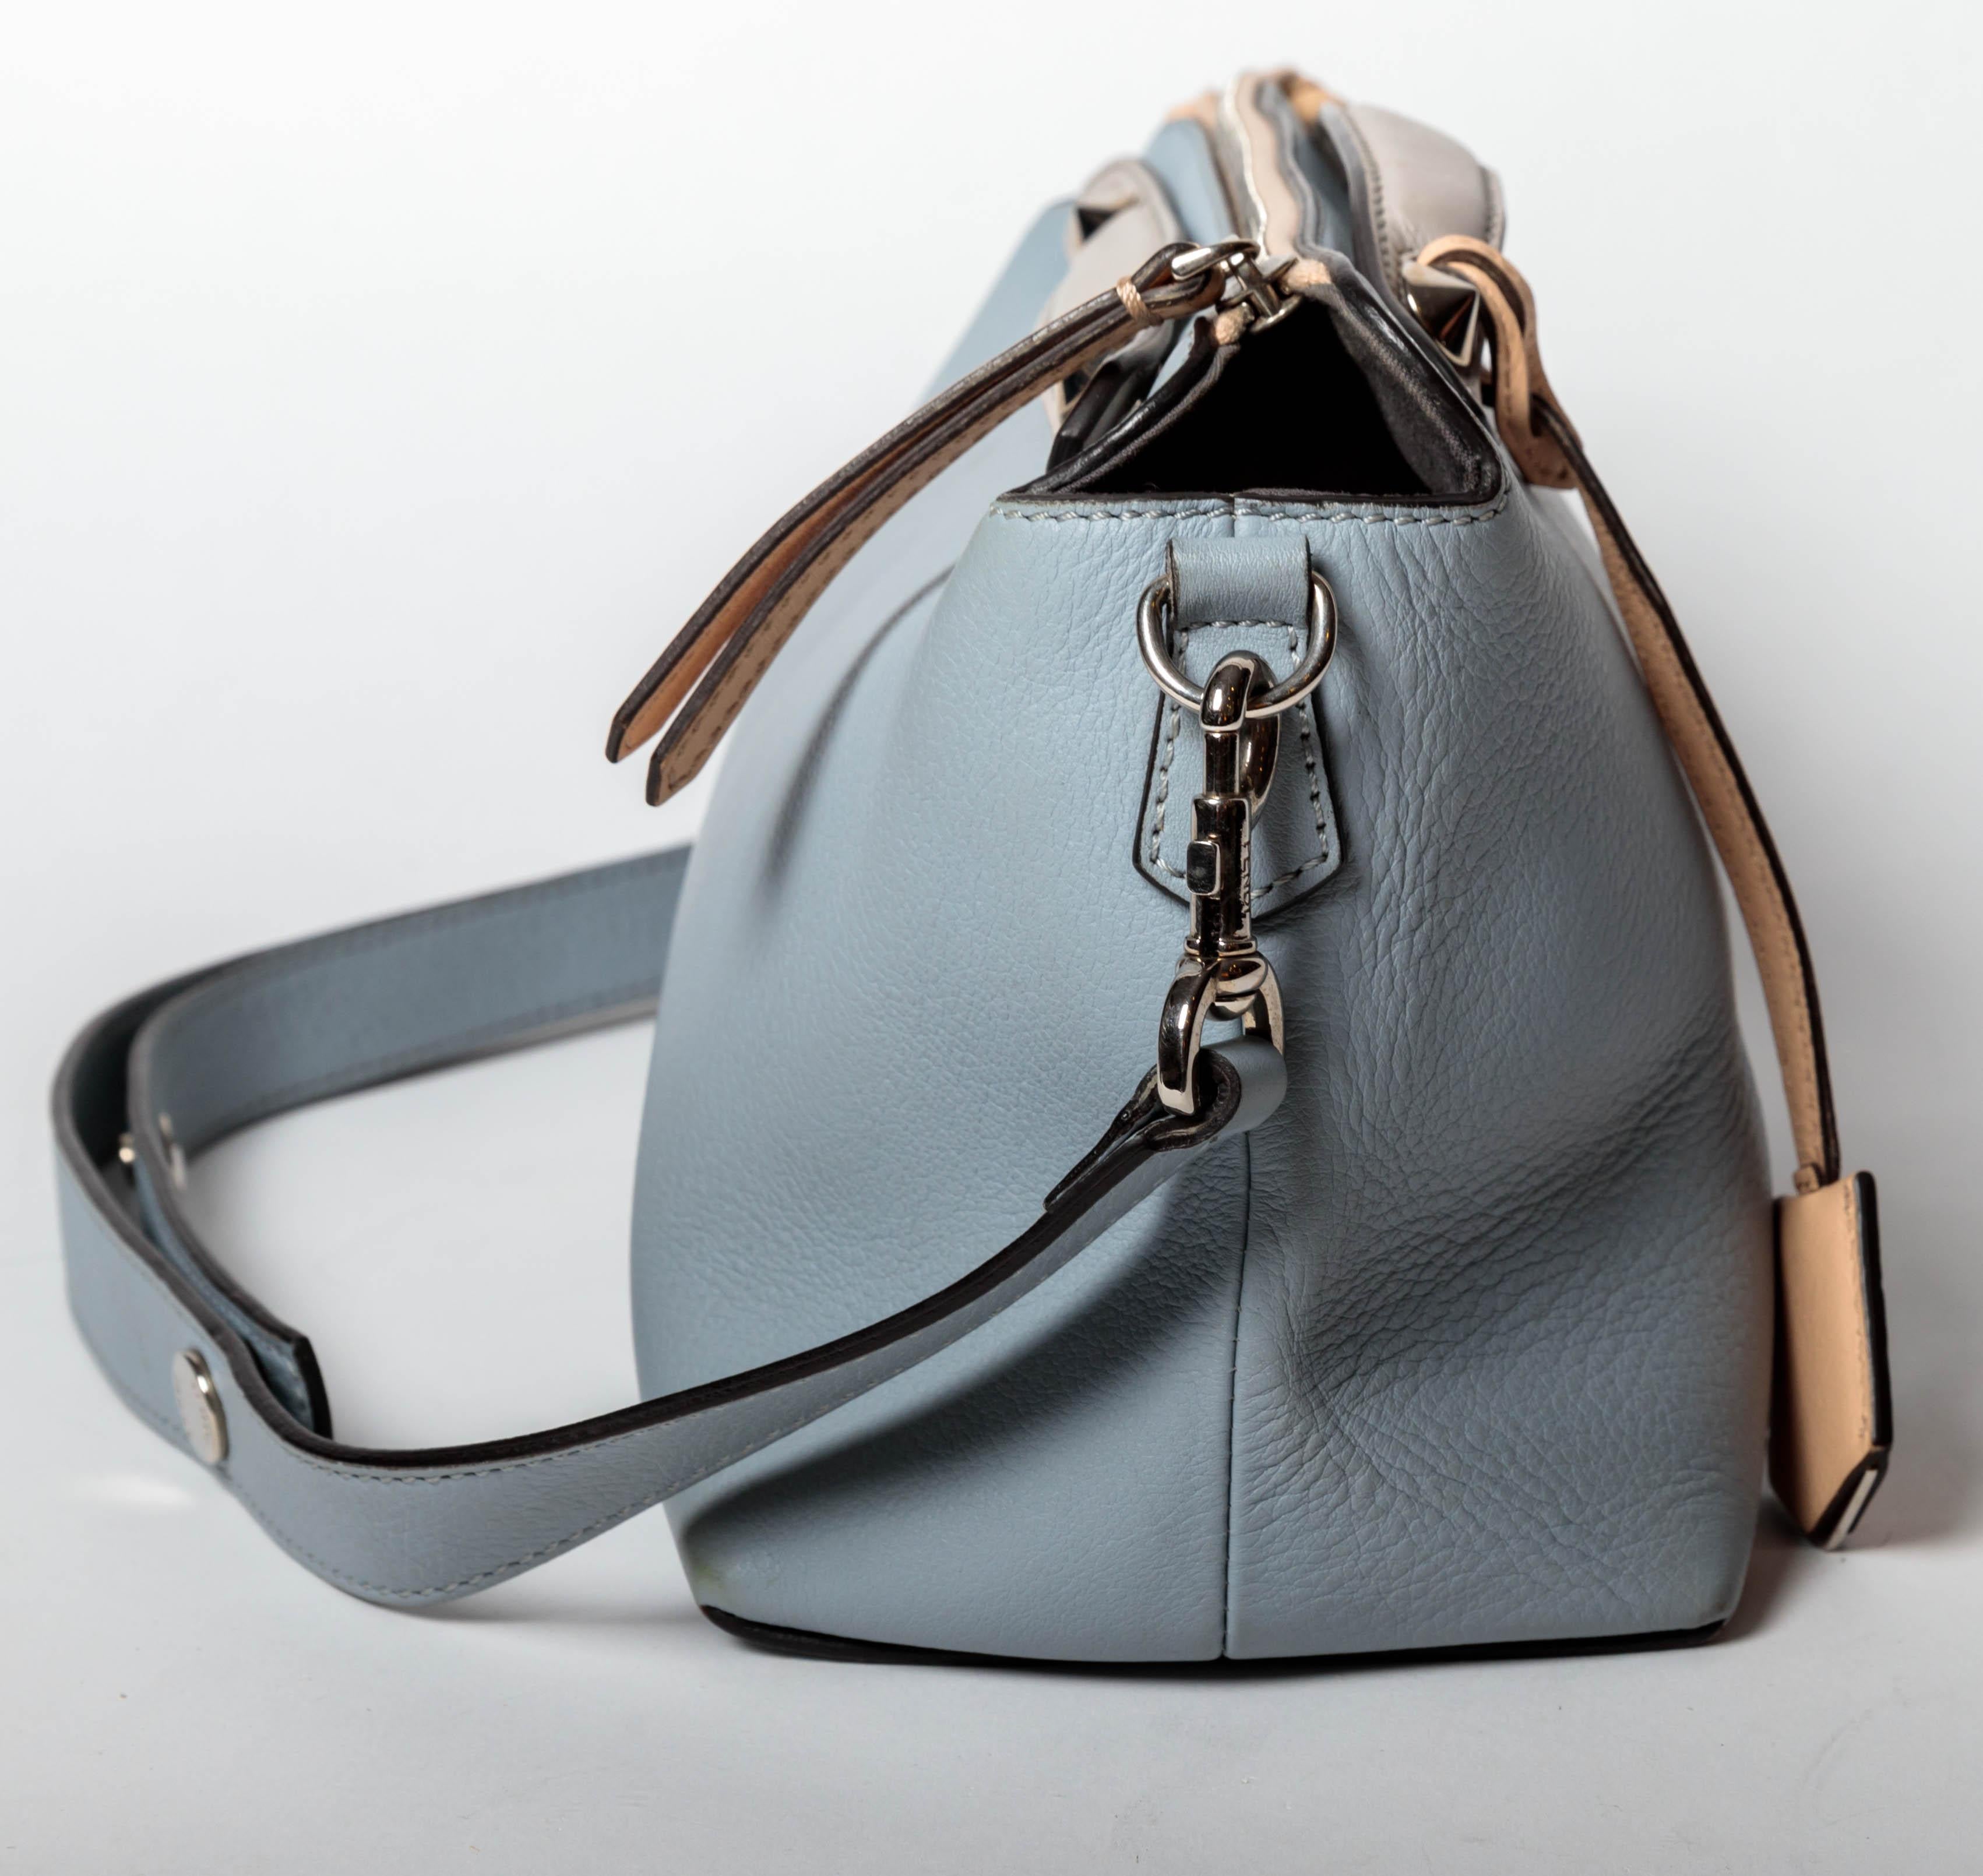 Fendi Top Handle Ice Blue Leather Bag with Detachable Shoulder Strap  In Excellent Condition For Sale In Westhampton Beach, NY